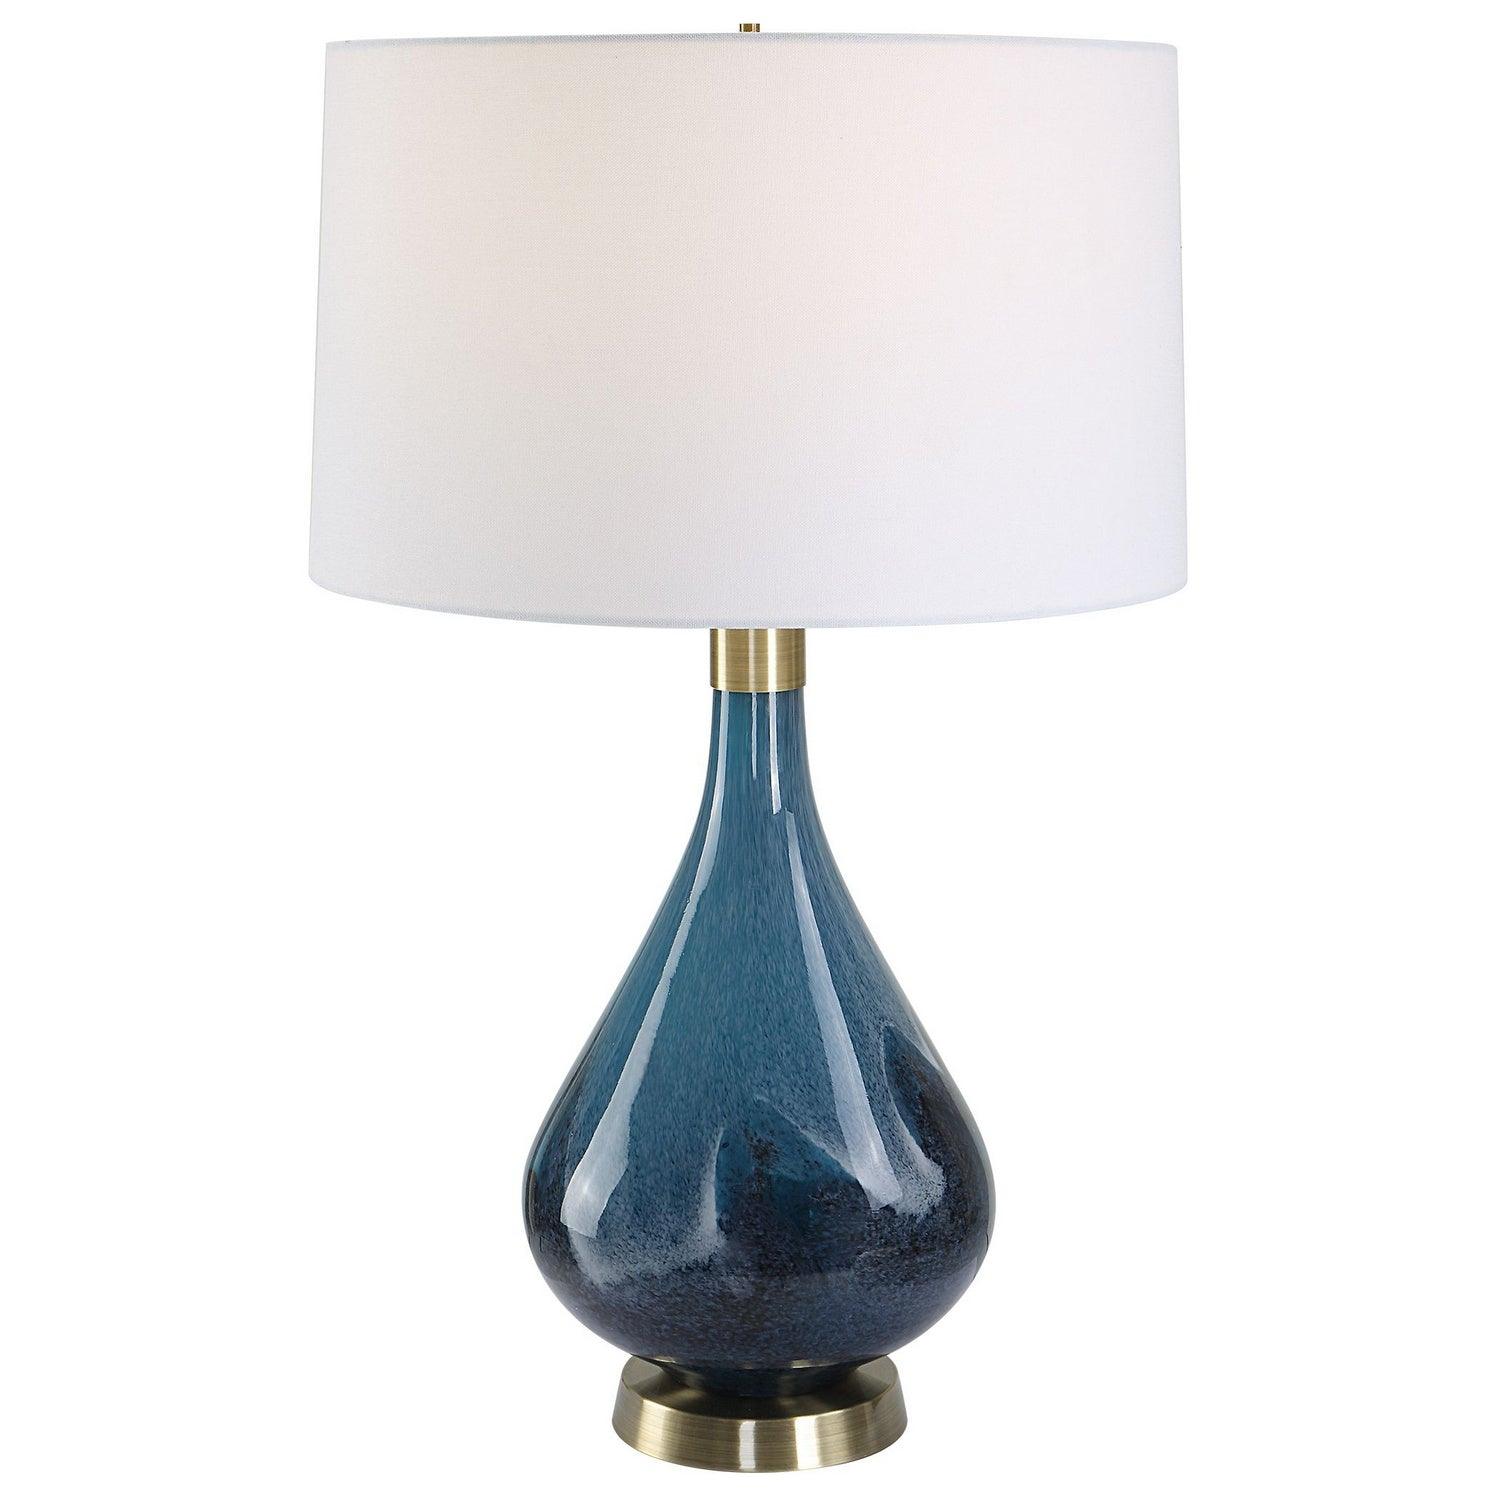 The Uttermost - Riviera One Light Table Lamp - 30098 | Montreal Lighting & Hardware